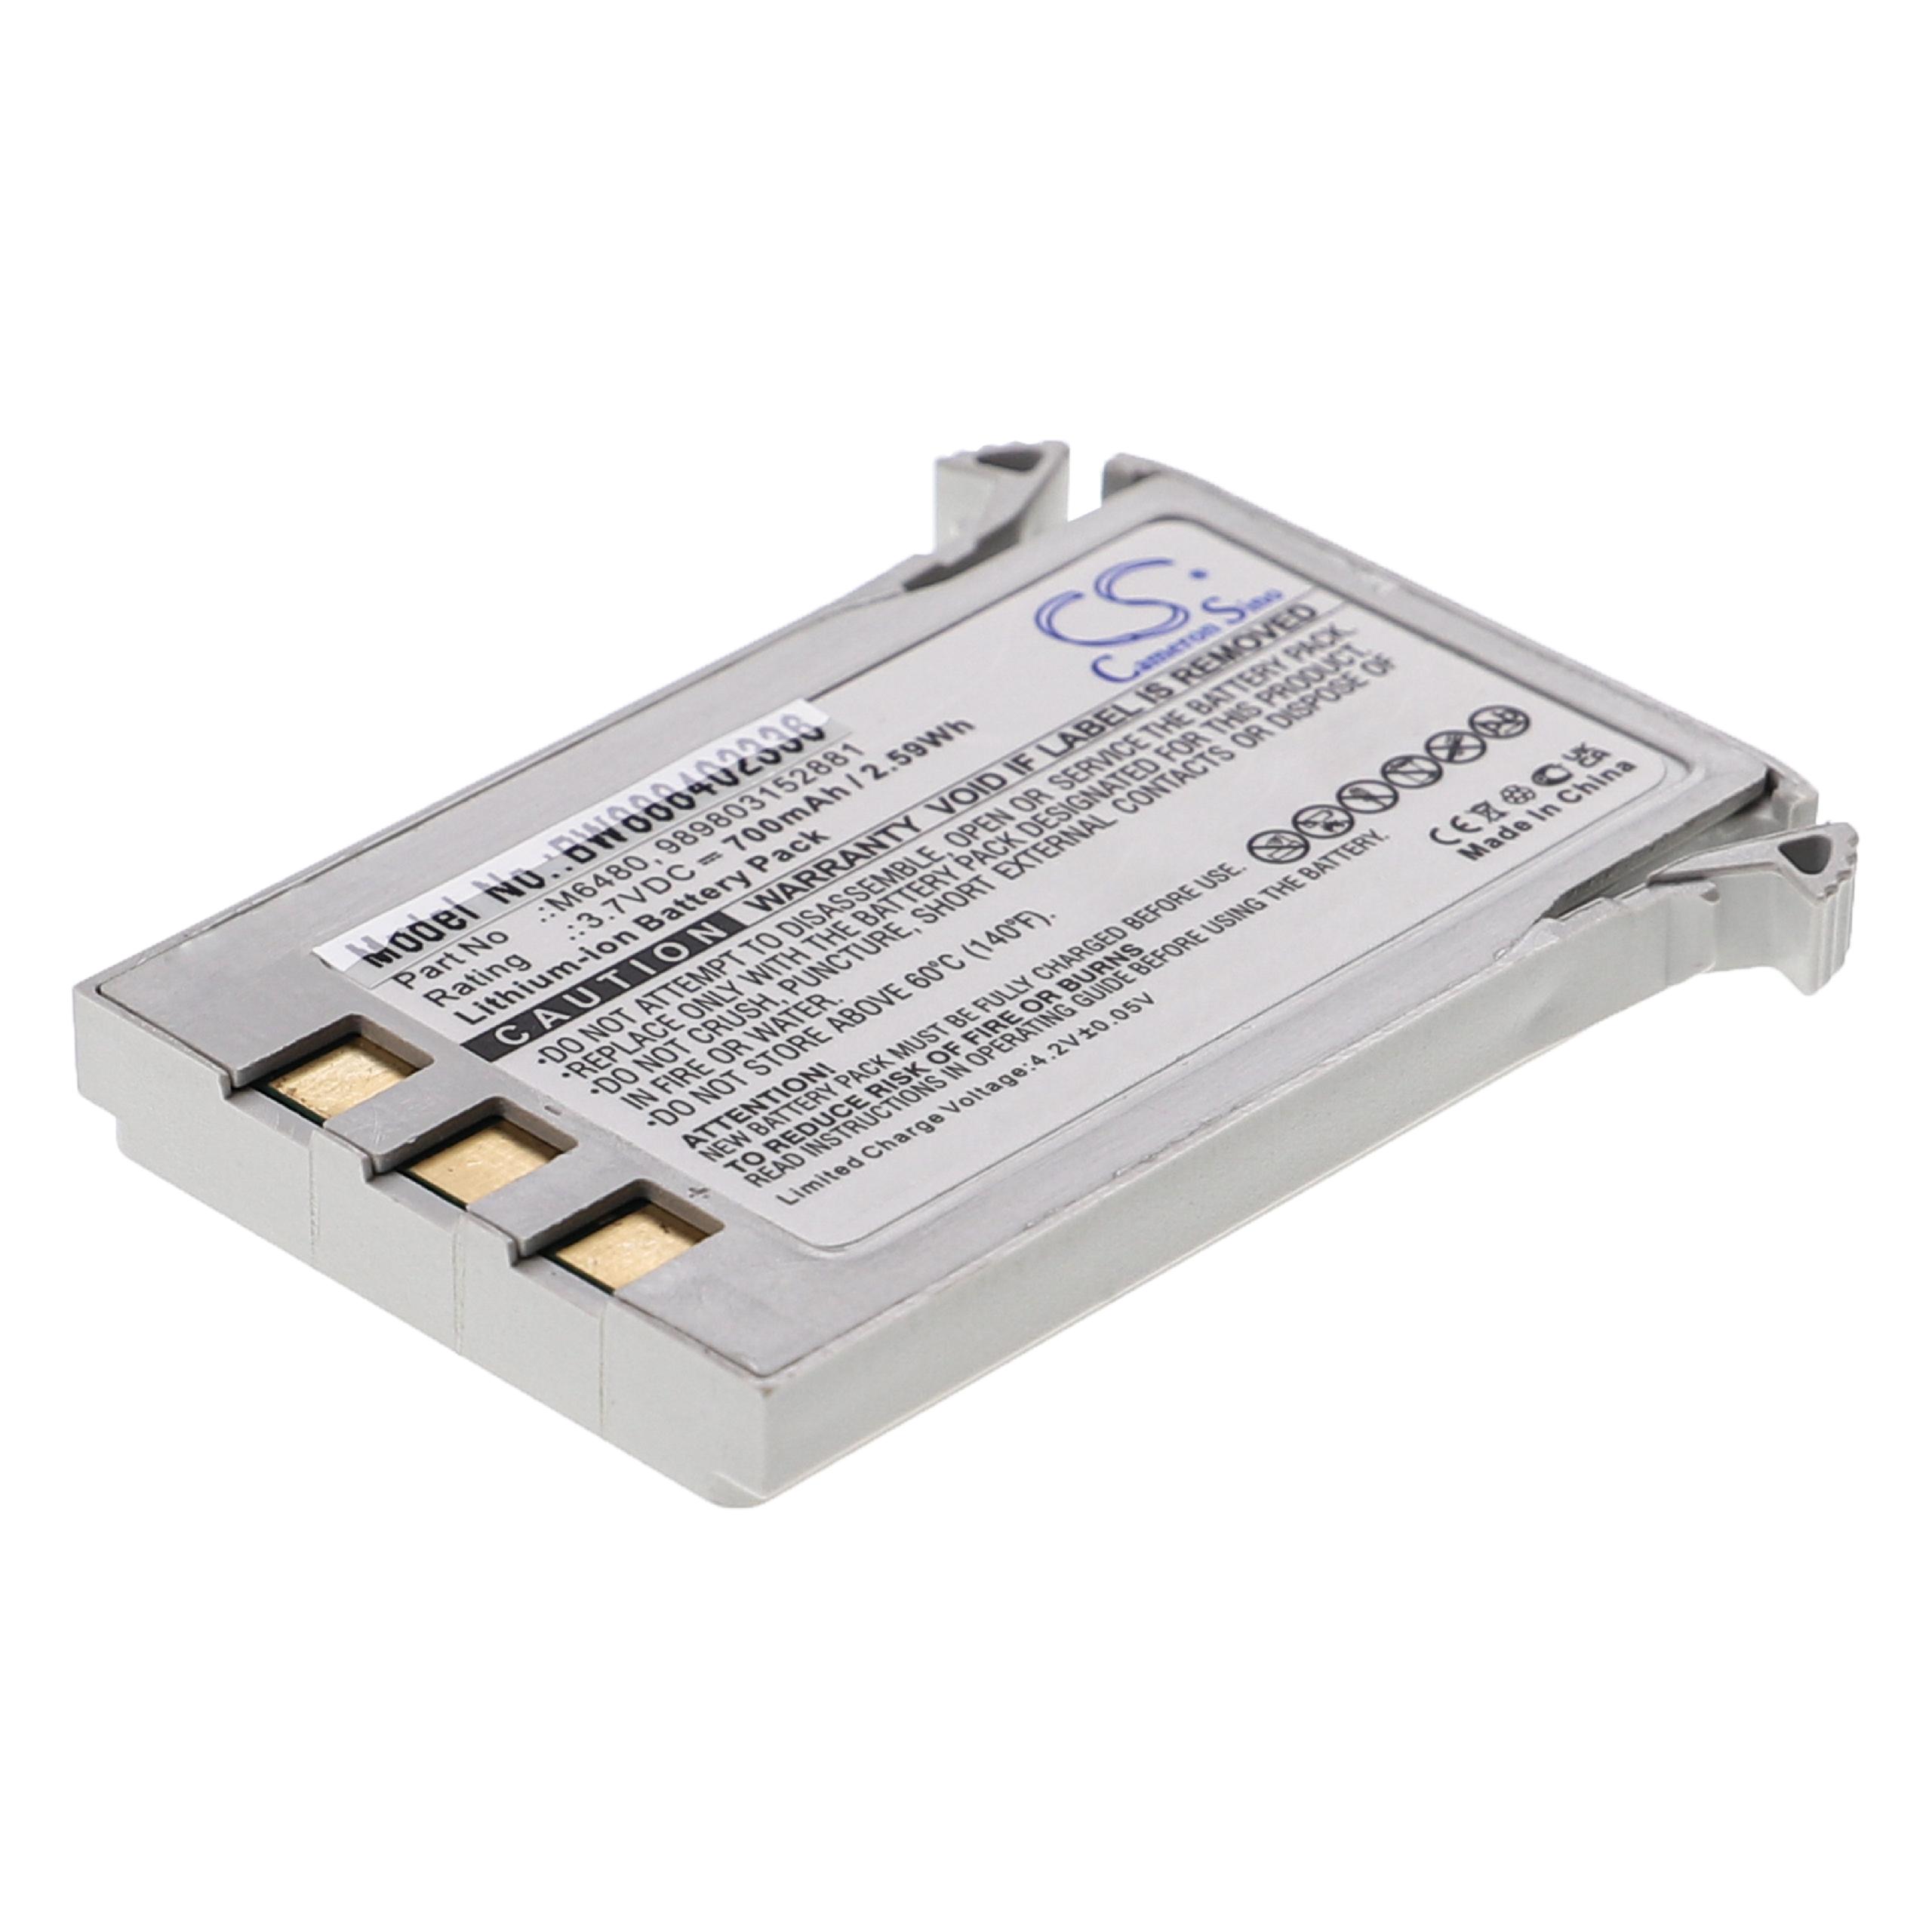 Medical Equipment Battery Replacement for Philips 989803152881, M6480 - 700mAh 3.7V Li-Ion